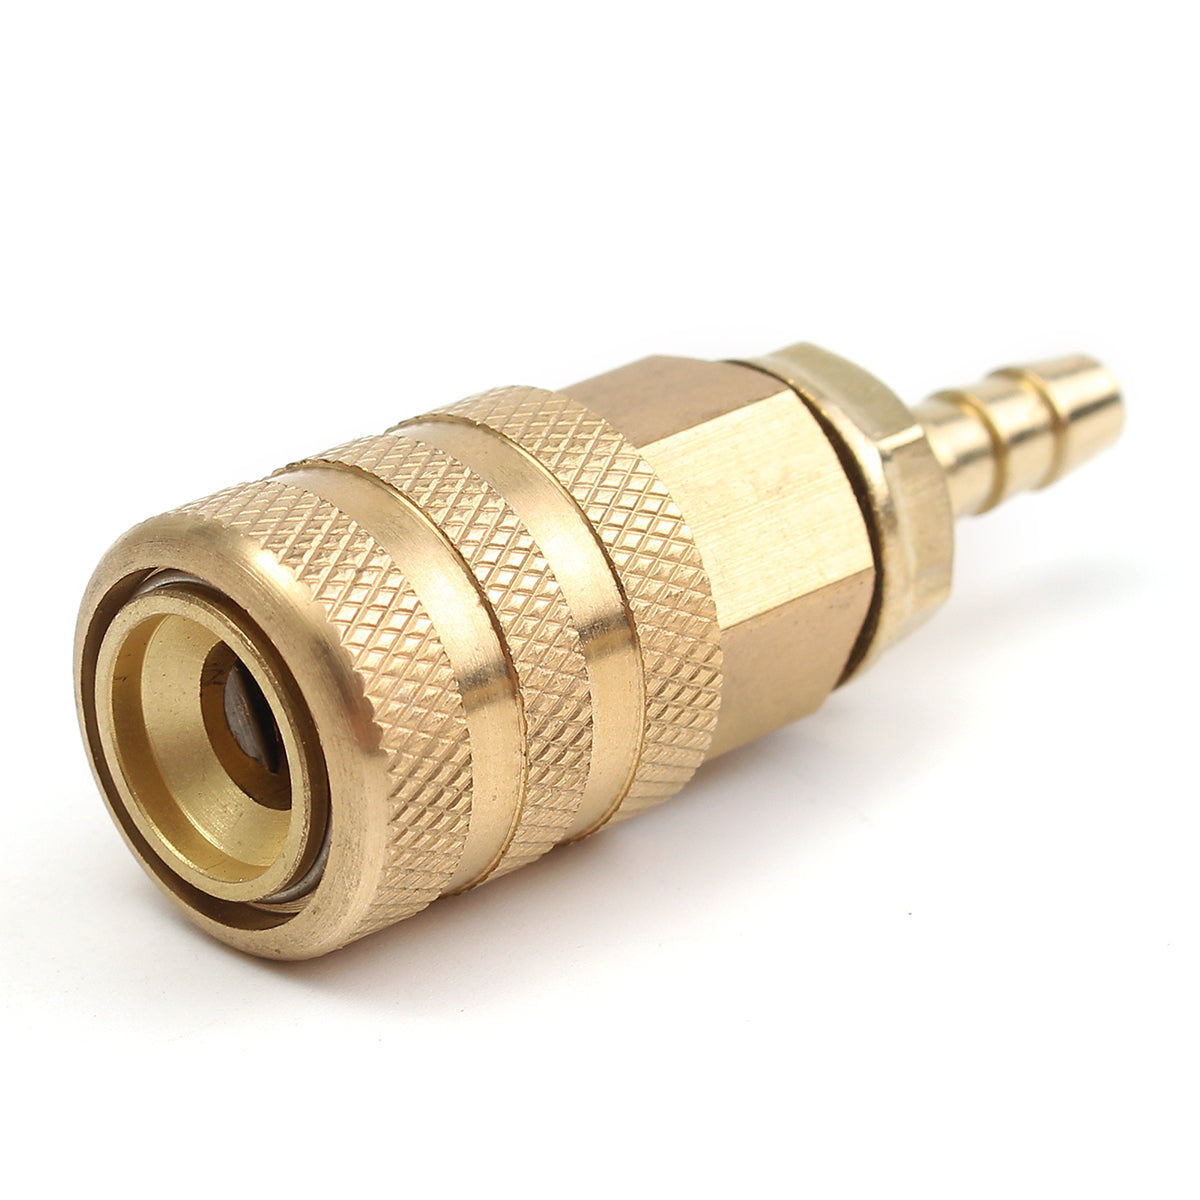 Tan Universal Tire Pressure Gauge Connector For Car Motorcycle Mountain Bike